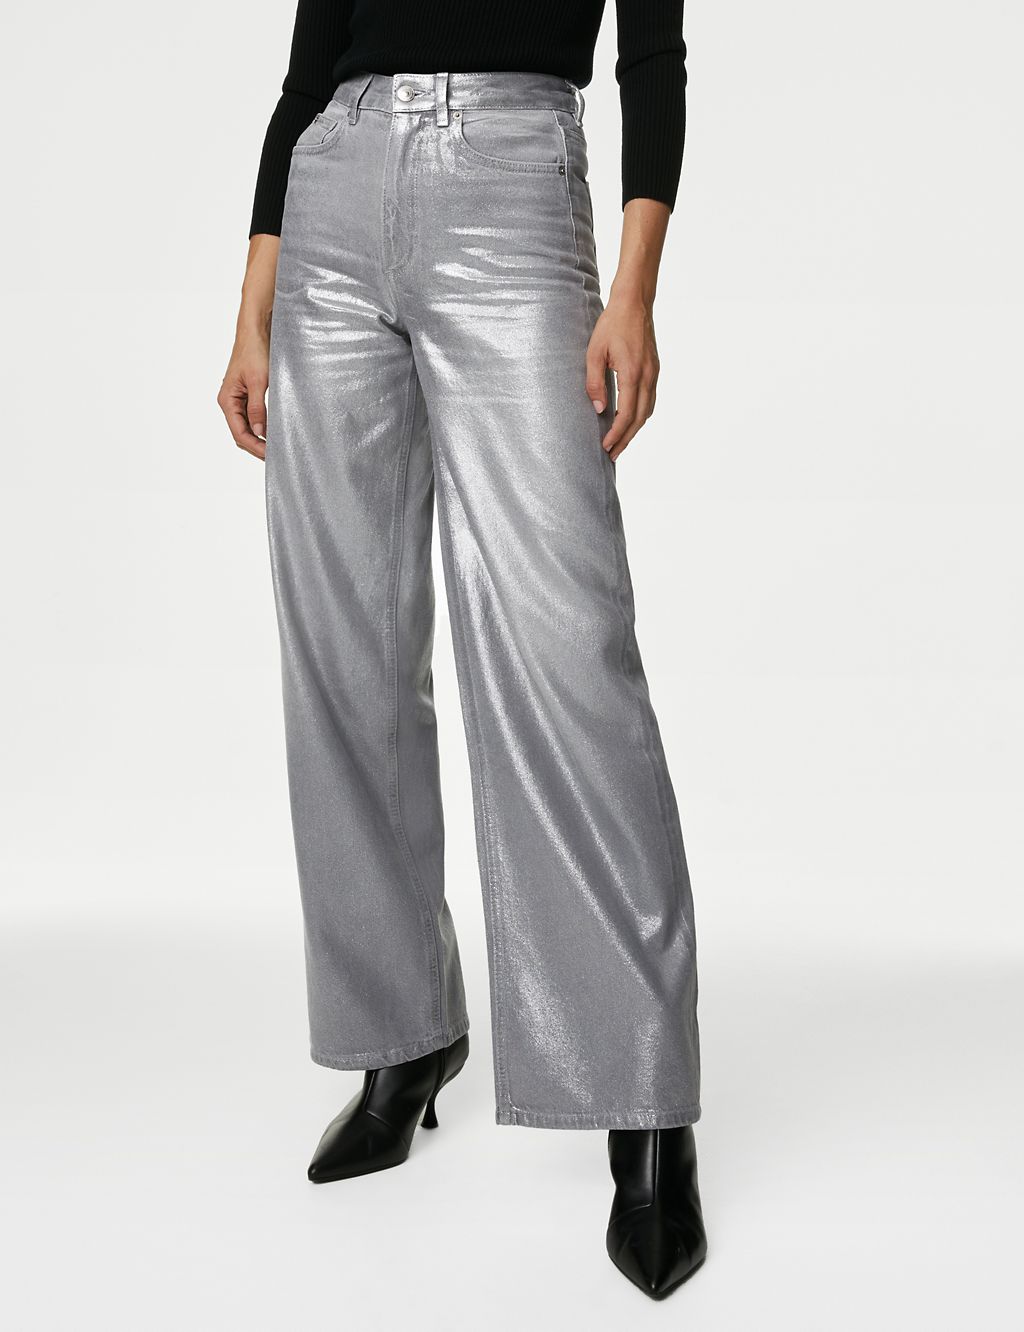 Metallic Wide Leg Jeans | M&S Collection | M&S